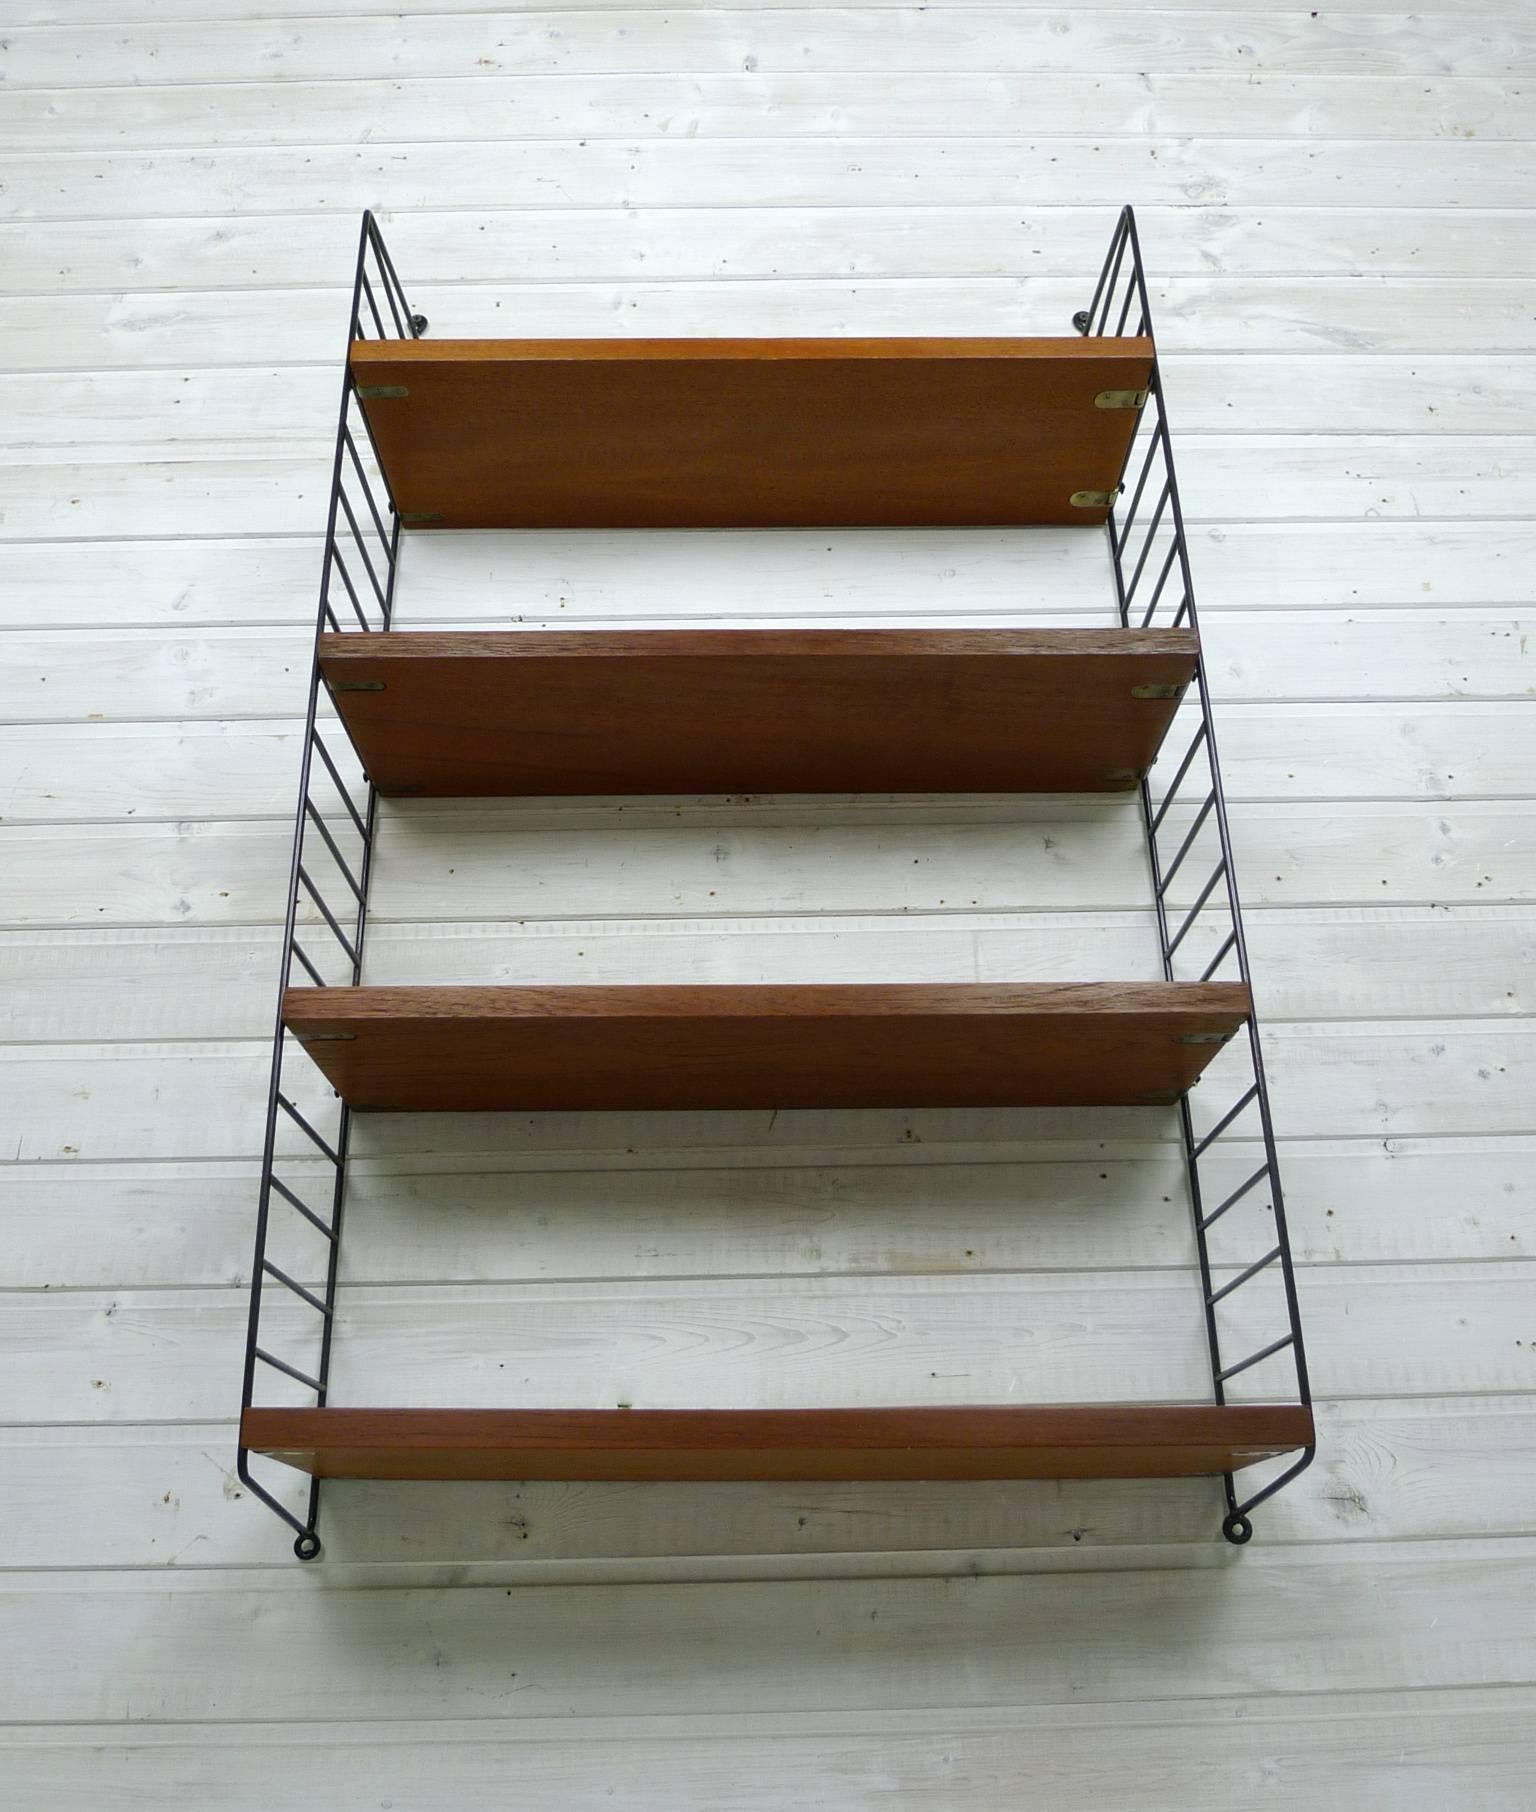 Scandinavian Modern Swedish Wall Unit with Four Teak Shelves by Nisse Strinning for String, 1950s